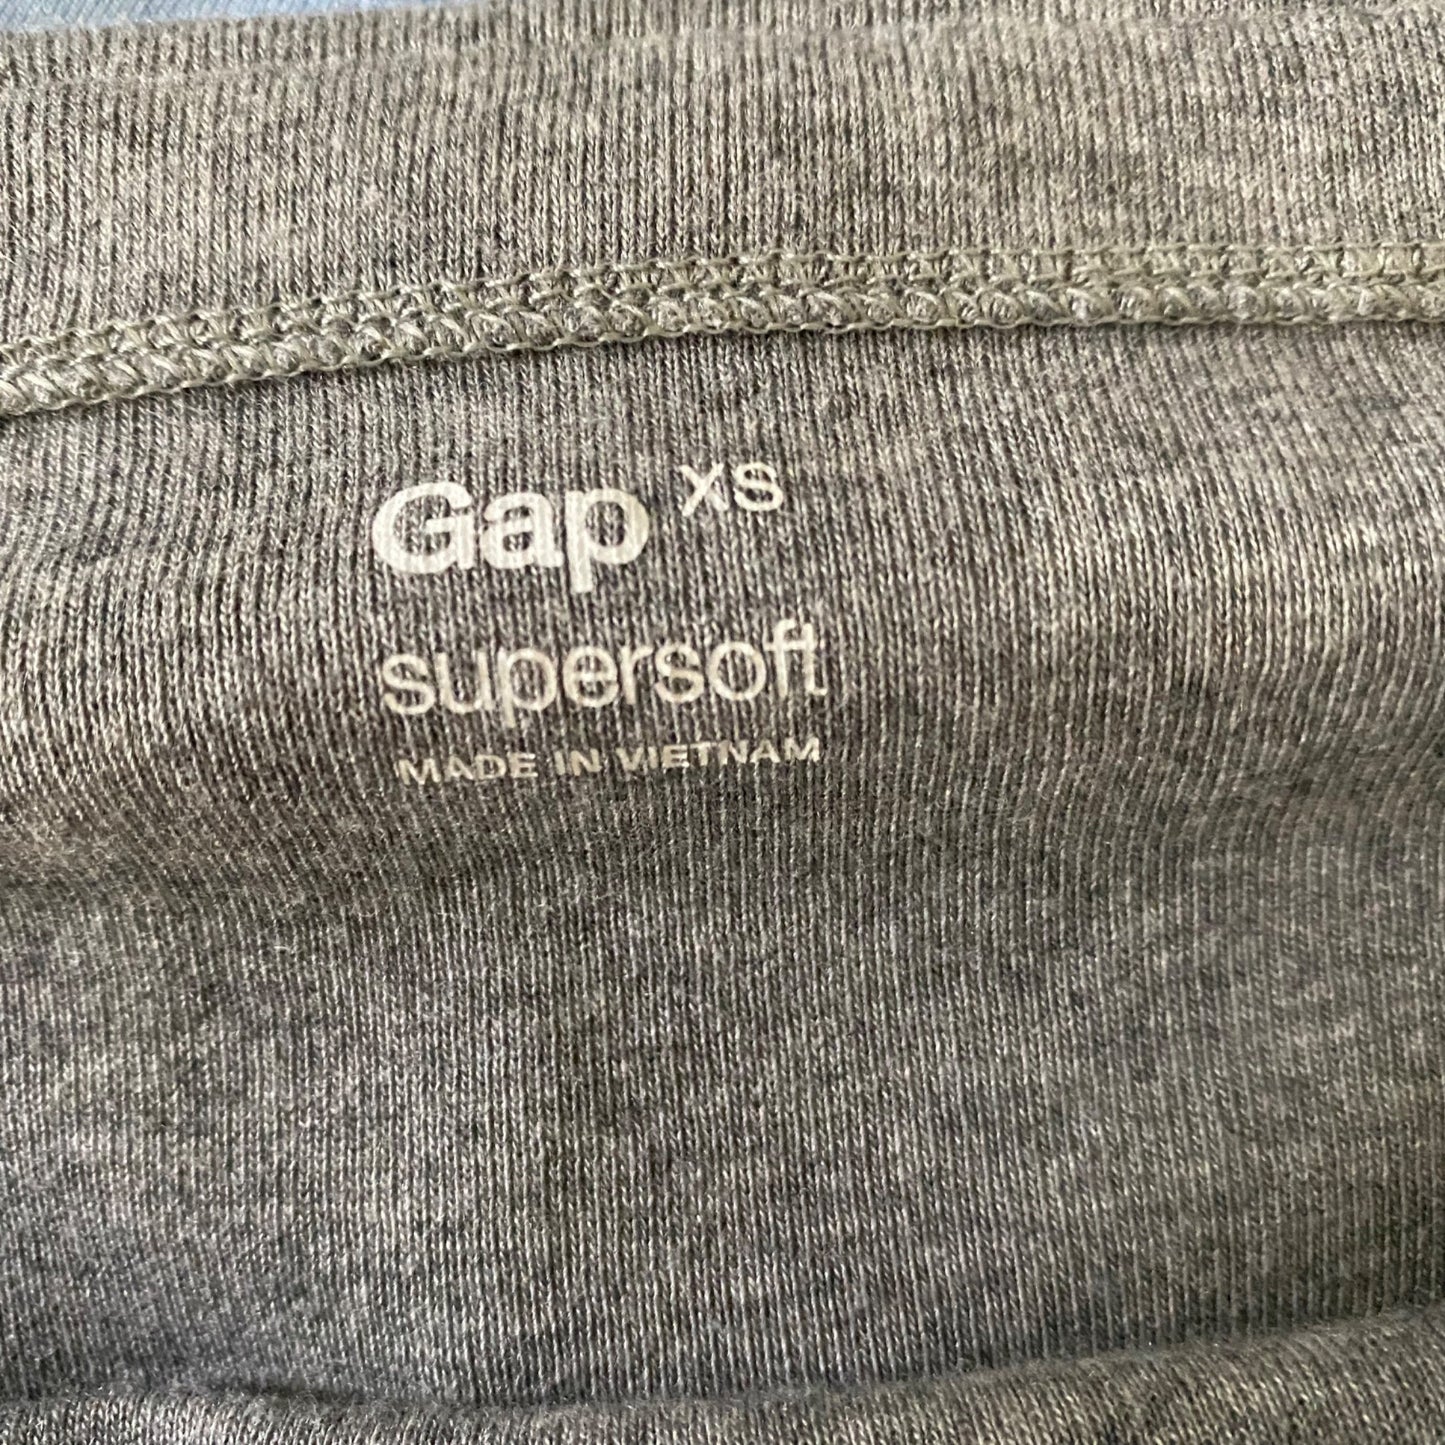 Gap sz XS cotton Long sleeve scoop neck fitted shirt